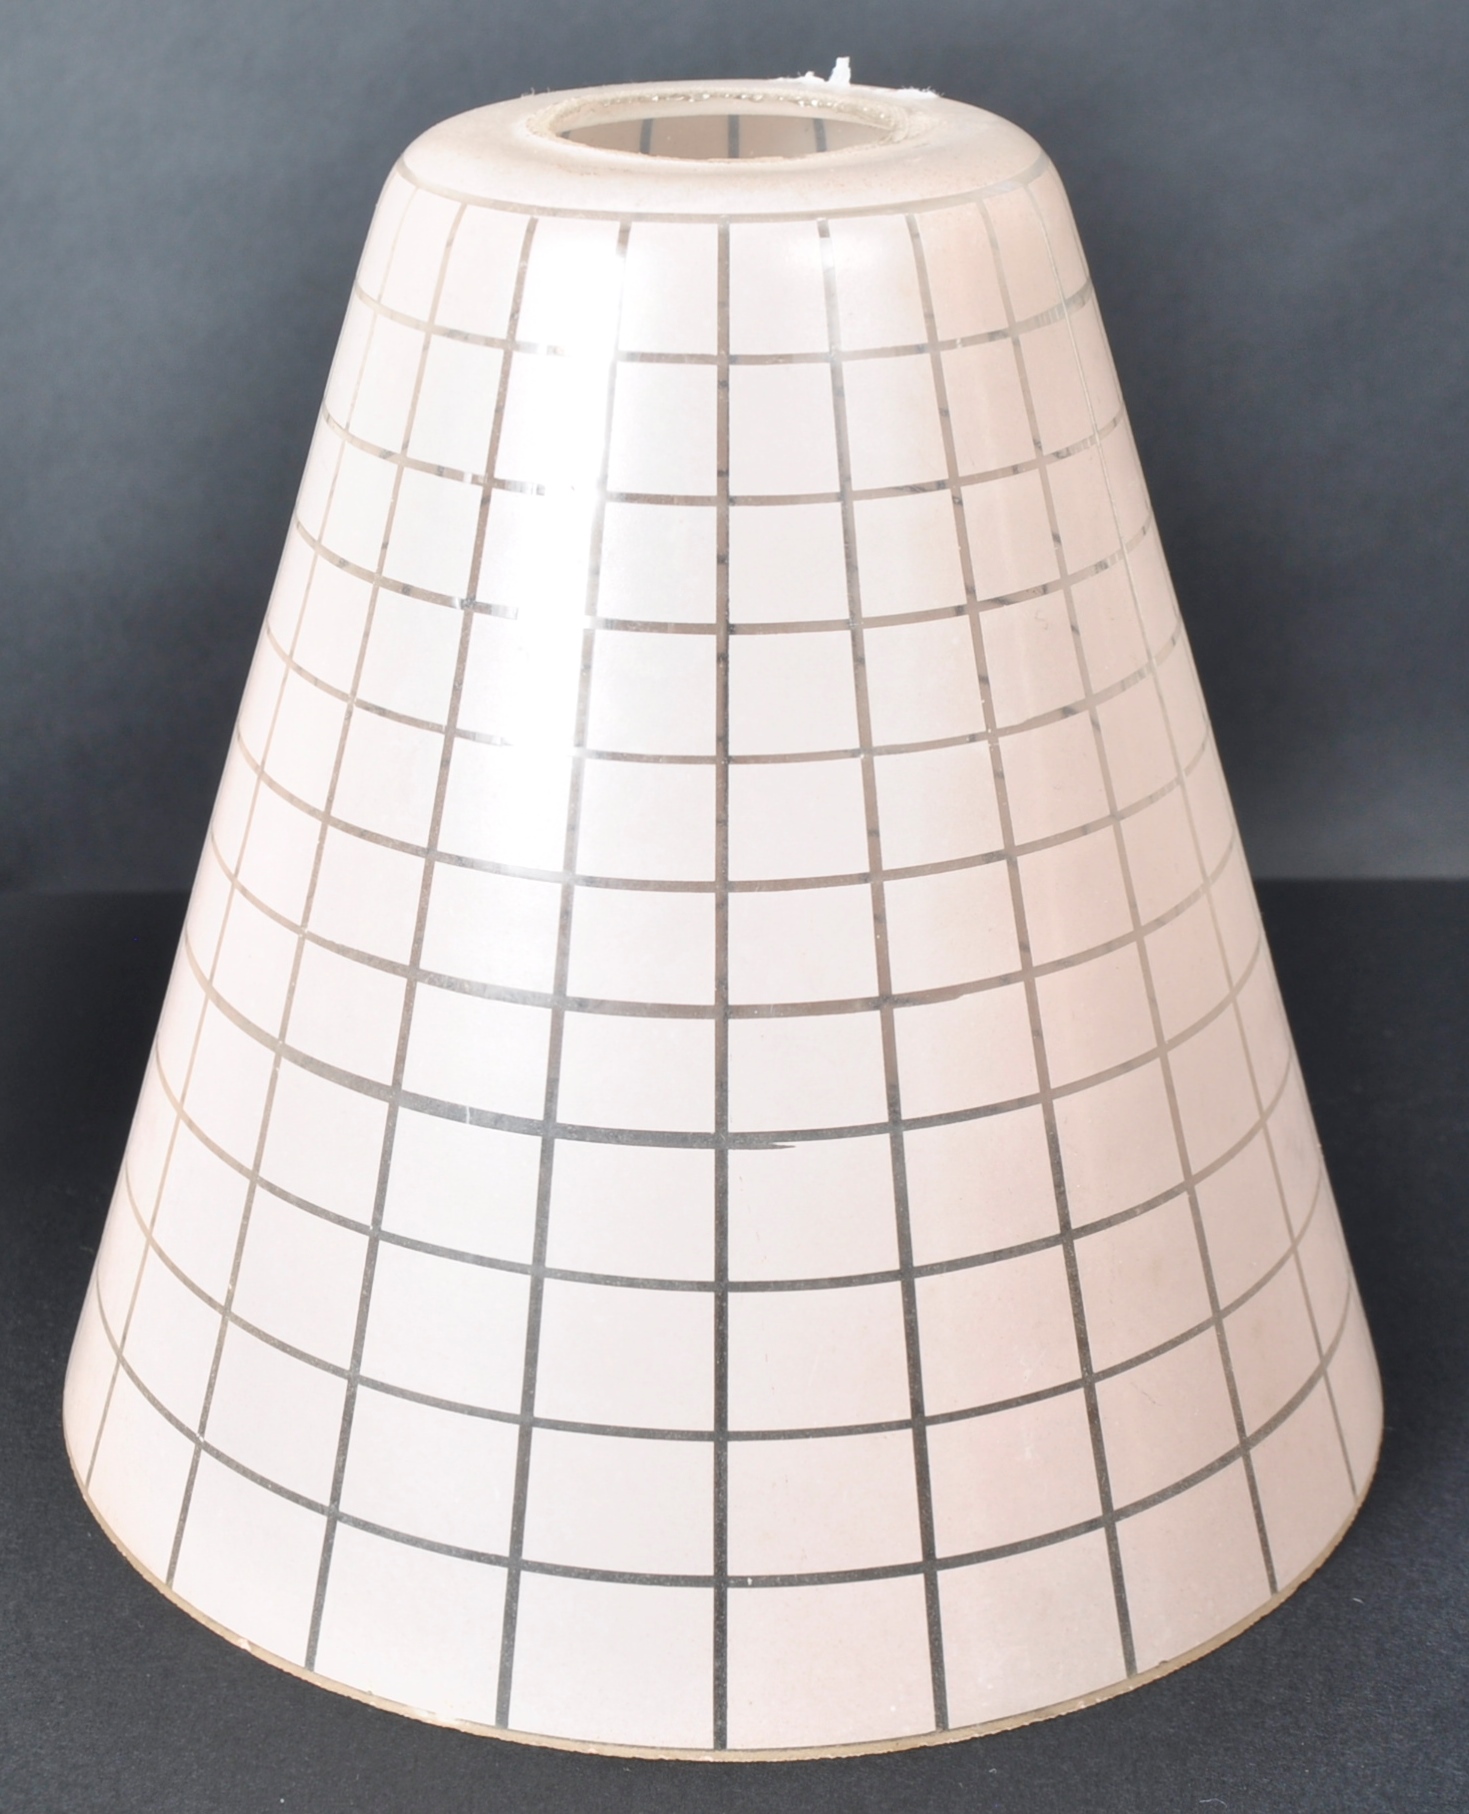 COLLECTION OF FIVE GLASS LAMP SHADES - Image 5 of 7